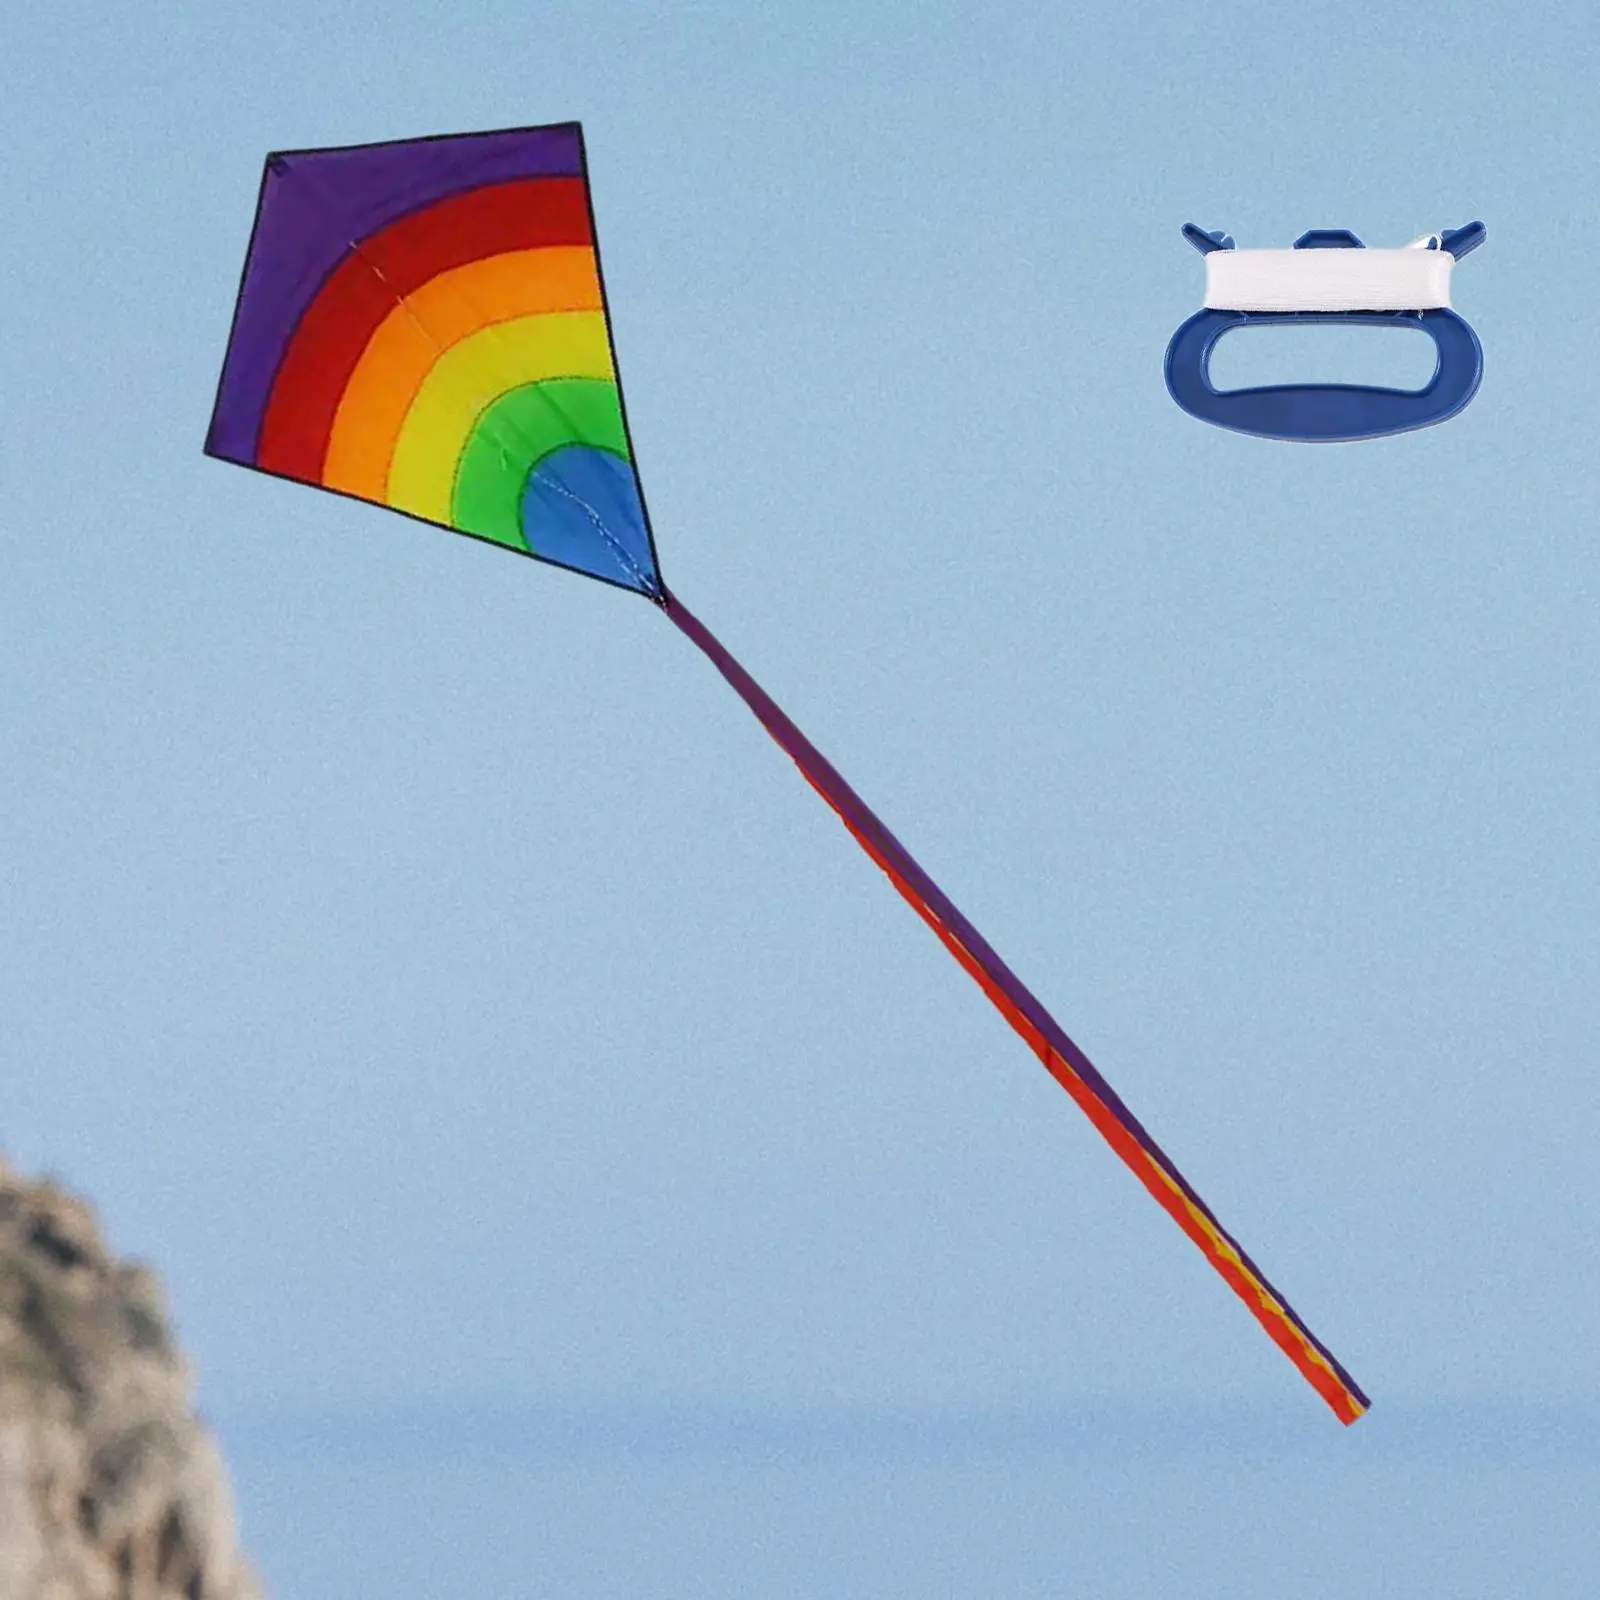 75x64cm Large Rainbow Diamond Kite with 6.56ft Long Tail for Beginners